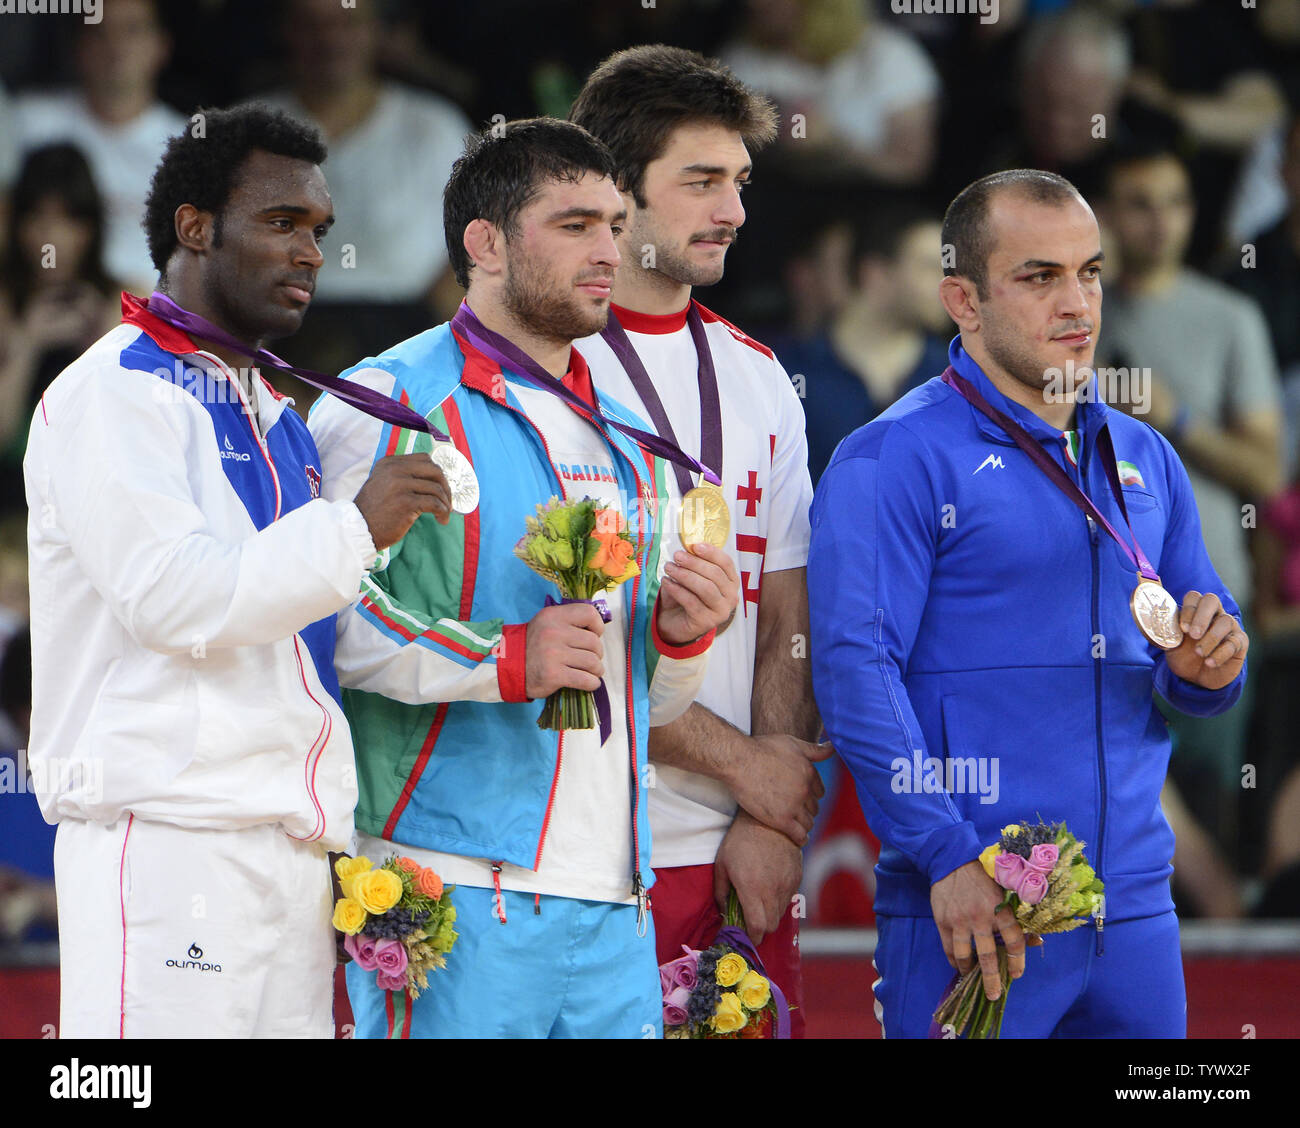 Medalists in the Men's 84kg Freestyle Wrestling show off their new hardware at the London 2012 Summer Olympics on August 10, 2012 in London. From left to right: Jaime Yusept Espinal of Puerto Rico, Silver Medal; Sharif Sharifov of Azerbaijan, Gold Medal; Dato Marsagishvili of Georgia, Bronze Medal; and Ehsan Naser Lashgari of Iran, Bronze Medal.  UPI/Ron Sachs Stock Photo